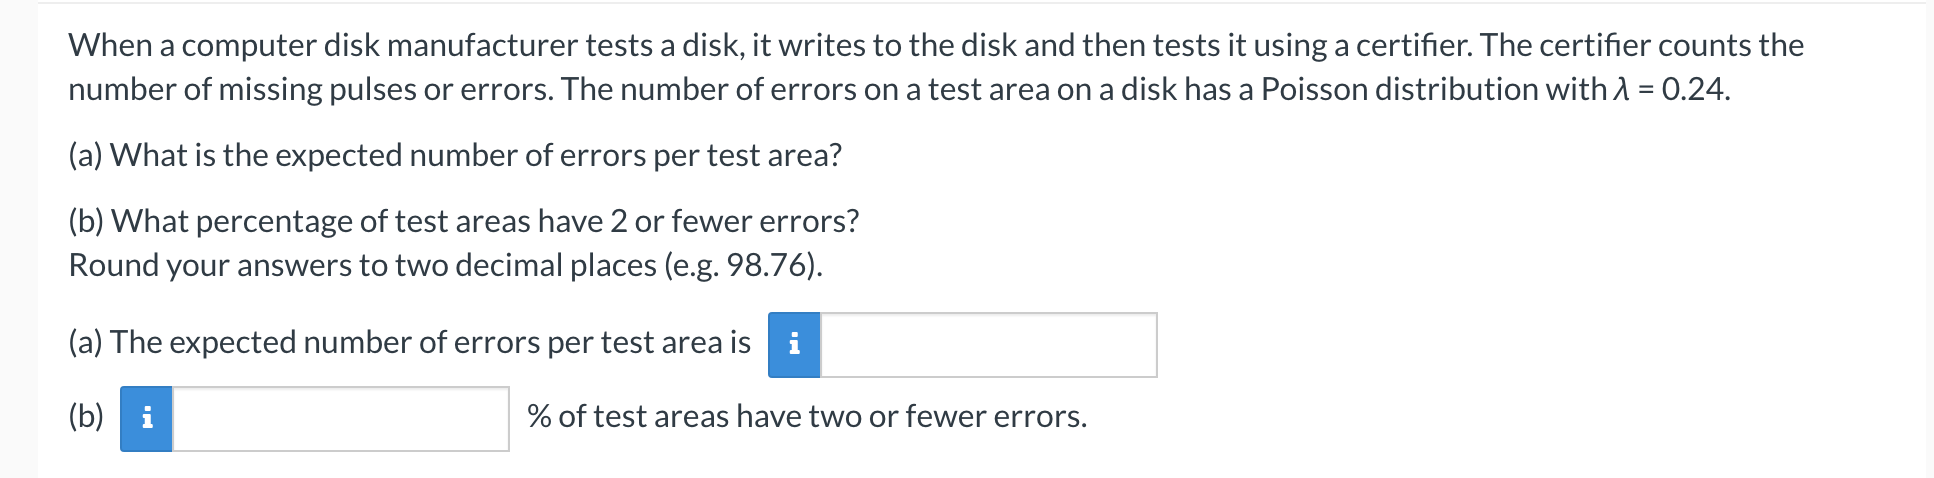 When a computer disk manufacturer tests a disk, it writes to the disk and then tests it using a certifier. The certifier counts the
number of missing pulses or errors. The number of errors on a test area on a disk has a Poisson distribution with A = 0.24.
(a) What is the expected number of errors per test area?
(b) What percentage of test areas have 2 or fewer errors?
Round your answers to two decimal places (e.g. 98.76).
(a) The expected number of errors per test area is
(b) i
% of test areas have two or fewer errors.
